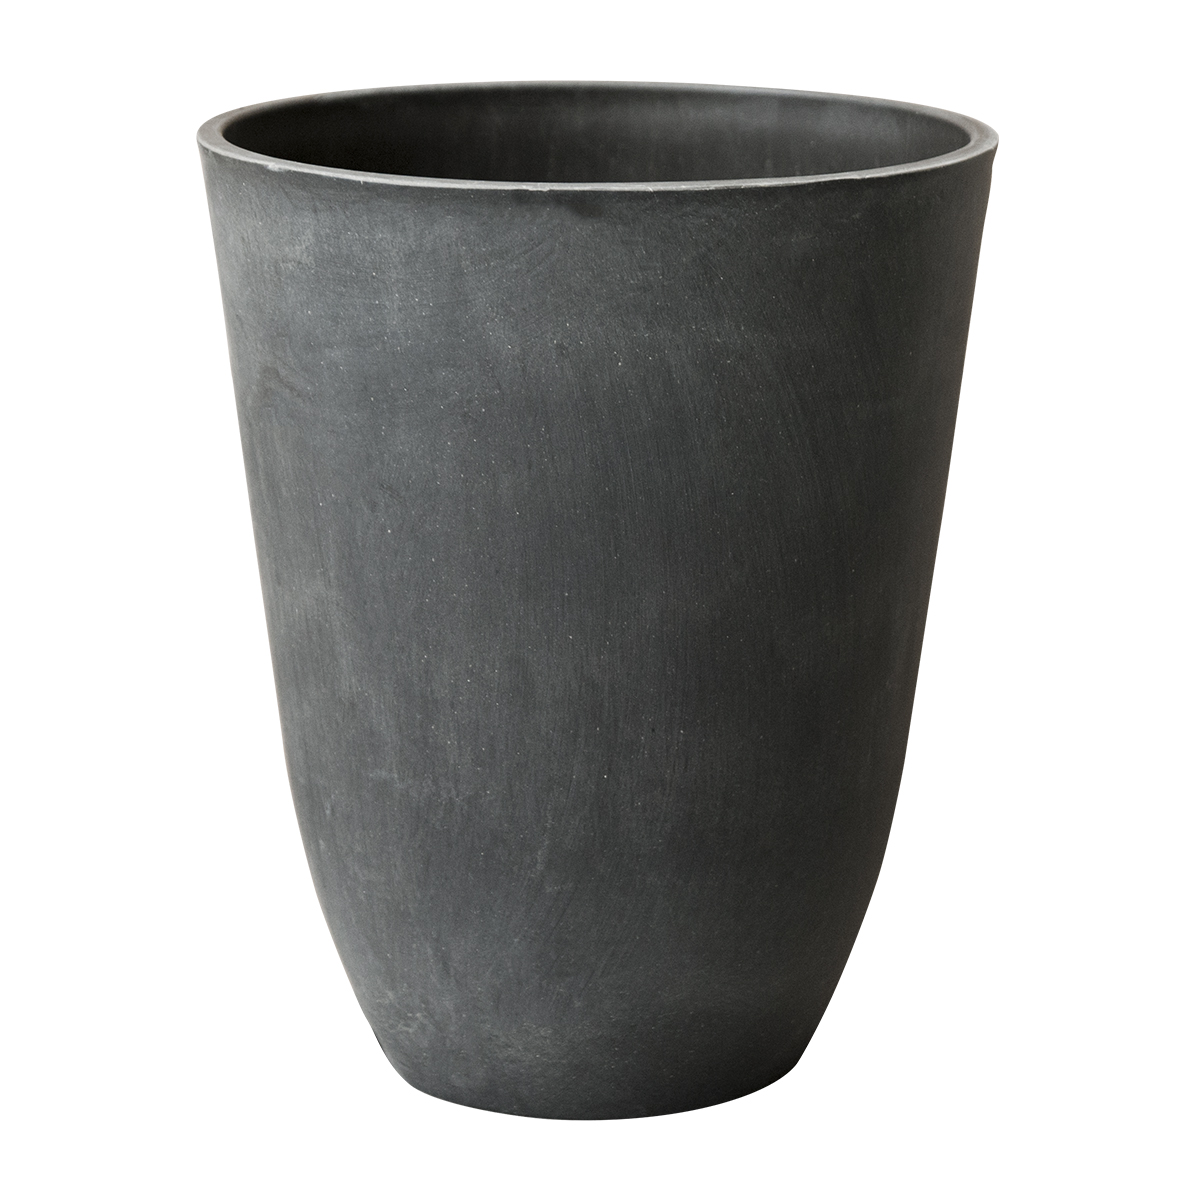 Tall Cement Effect Lightweight Recycled Plastic Planter